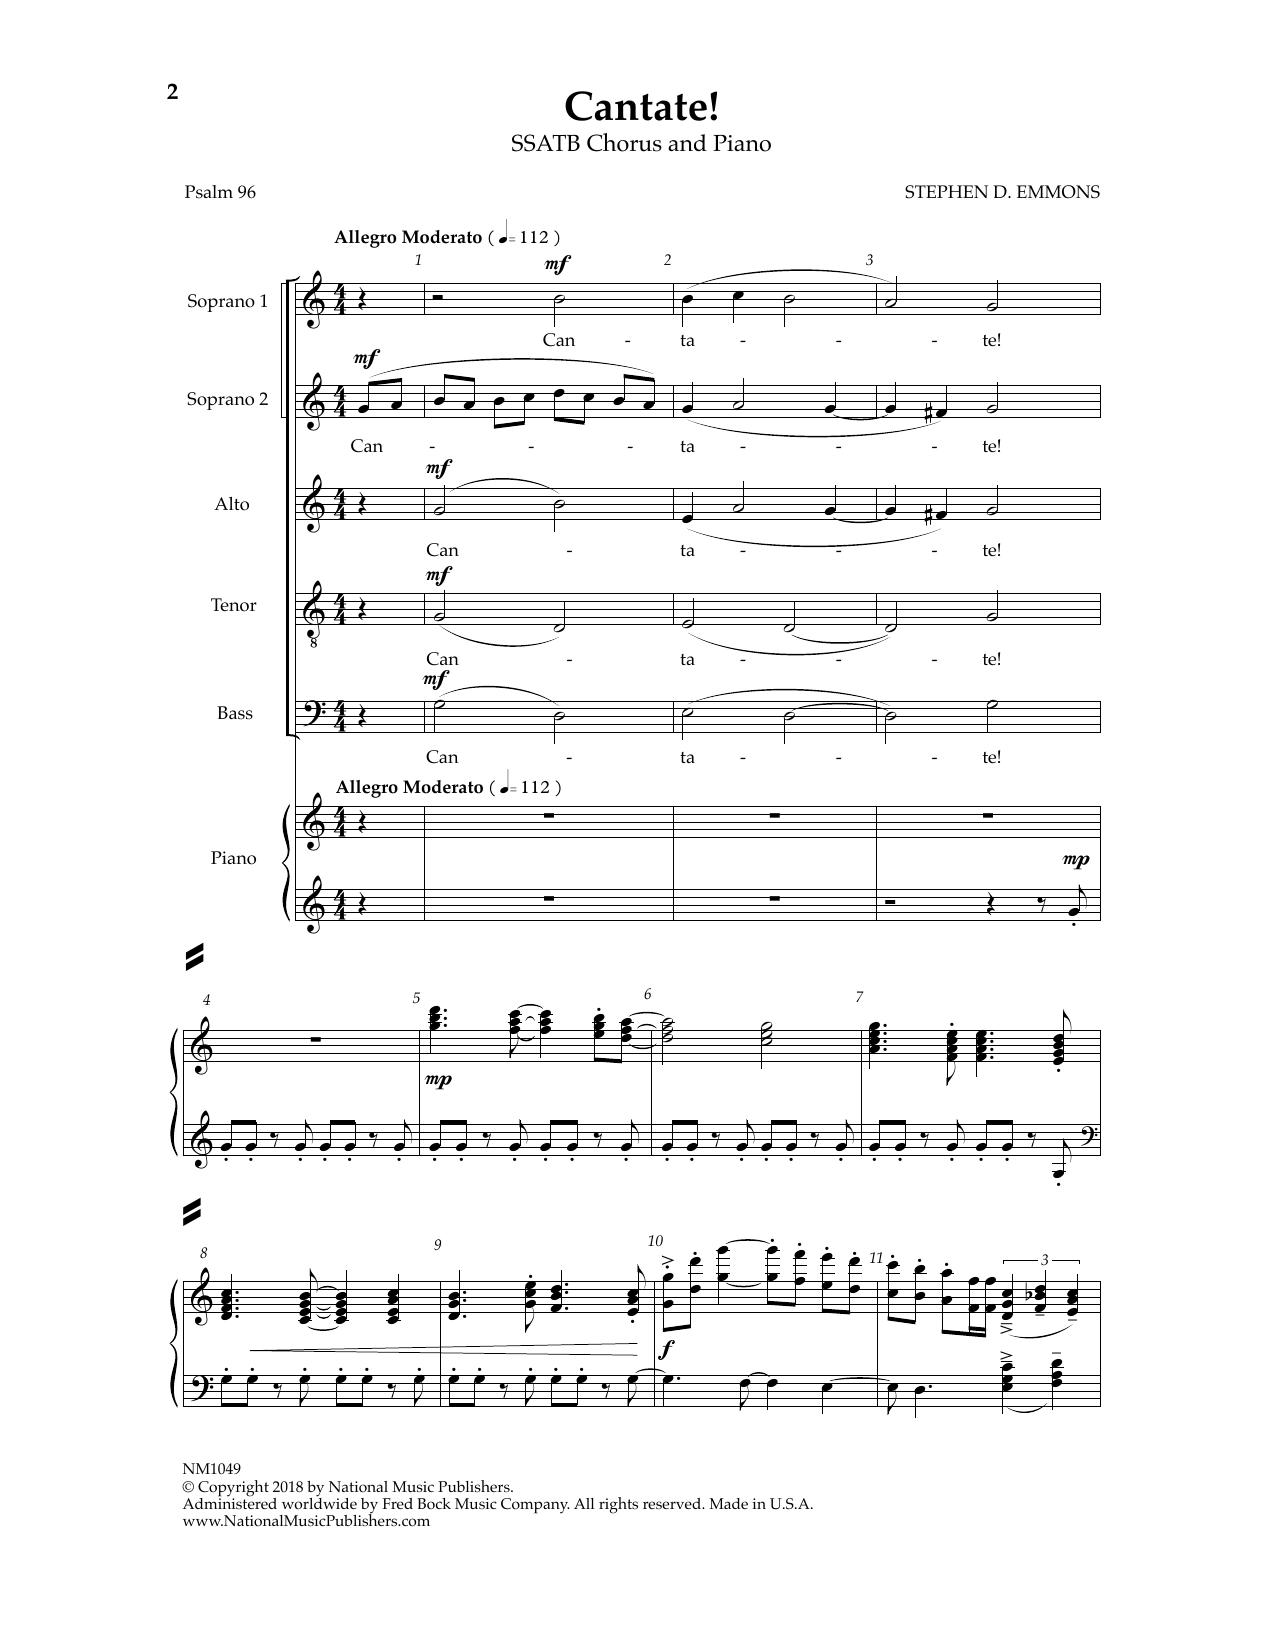 Download Stephen D. Emmons Cantate! Sheet Music